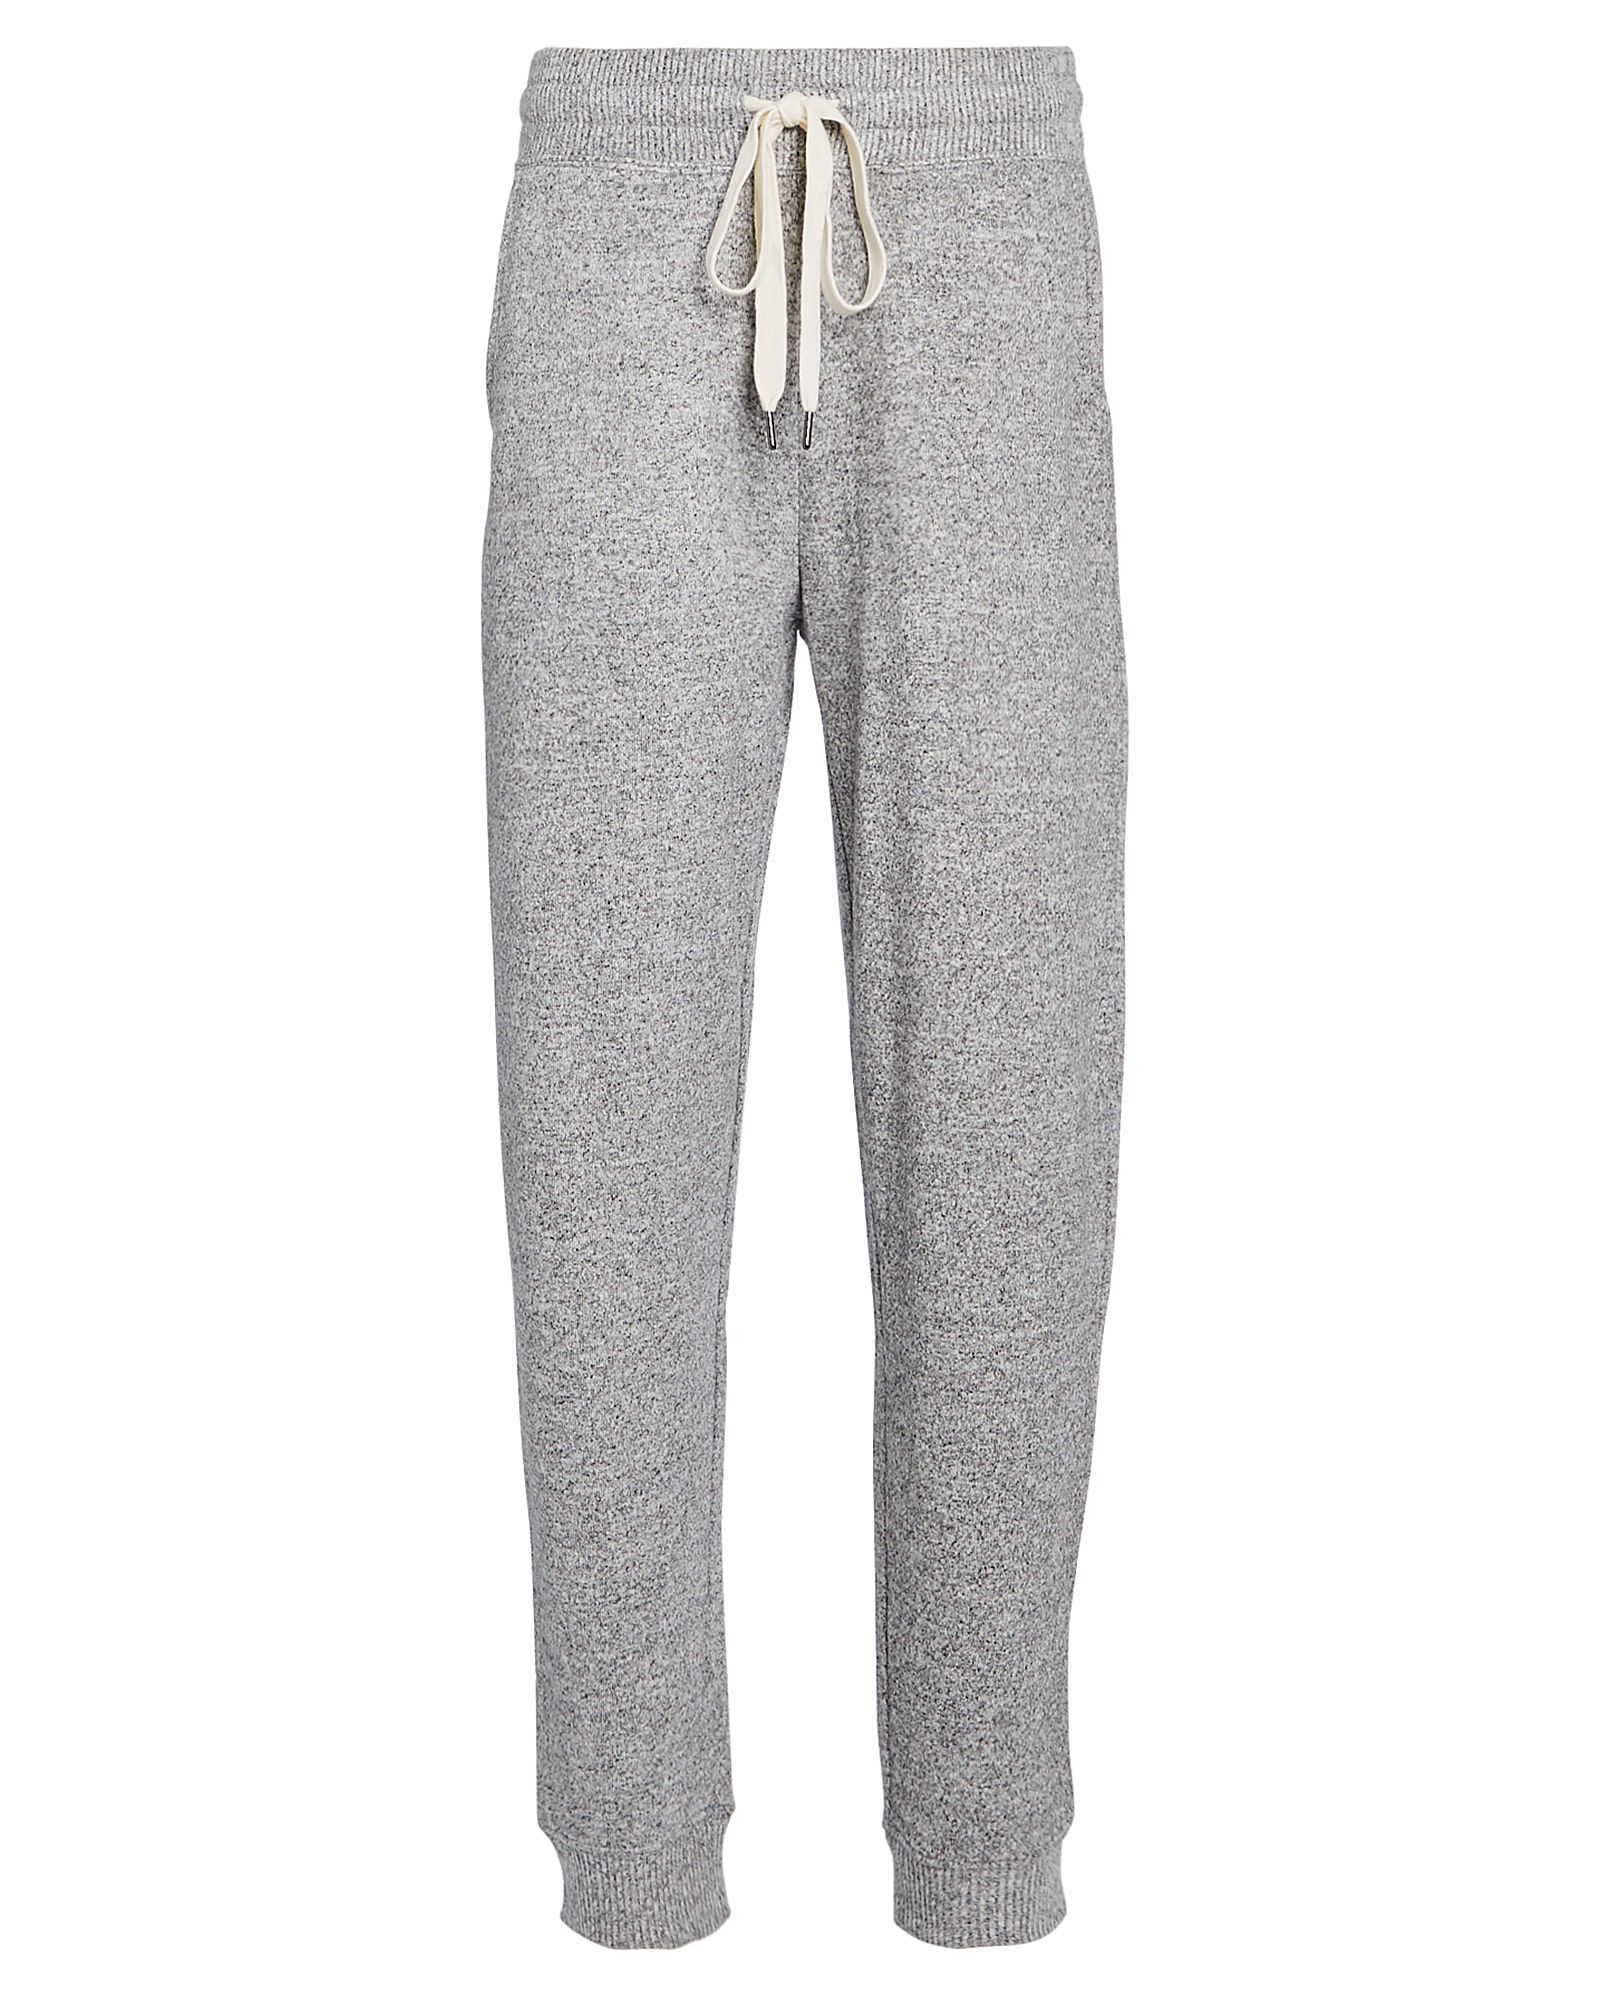 RAILS Oakland French Terry Sweatpants,060042203661